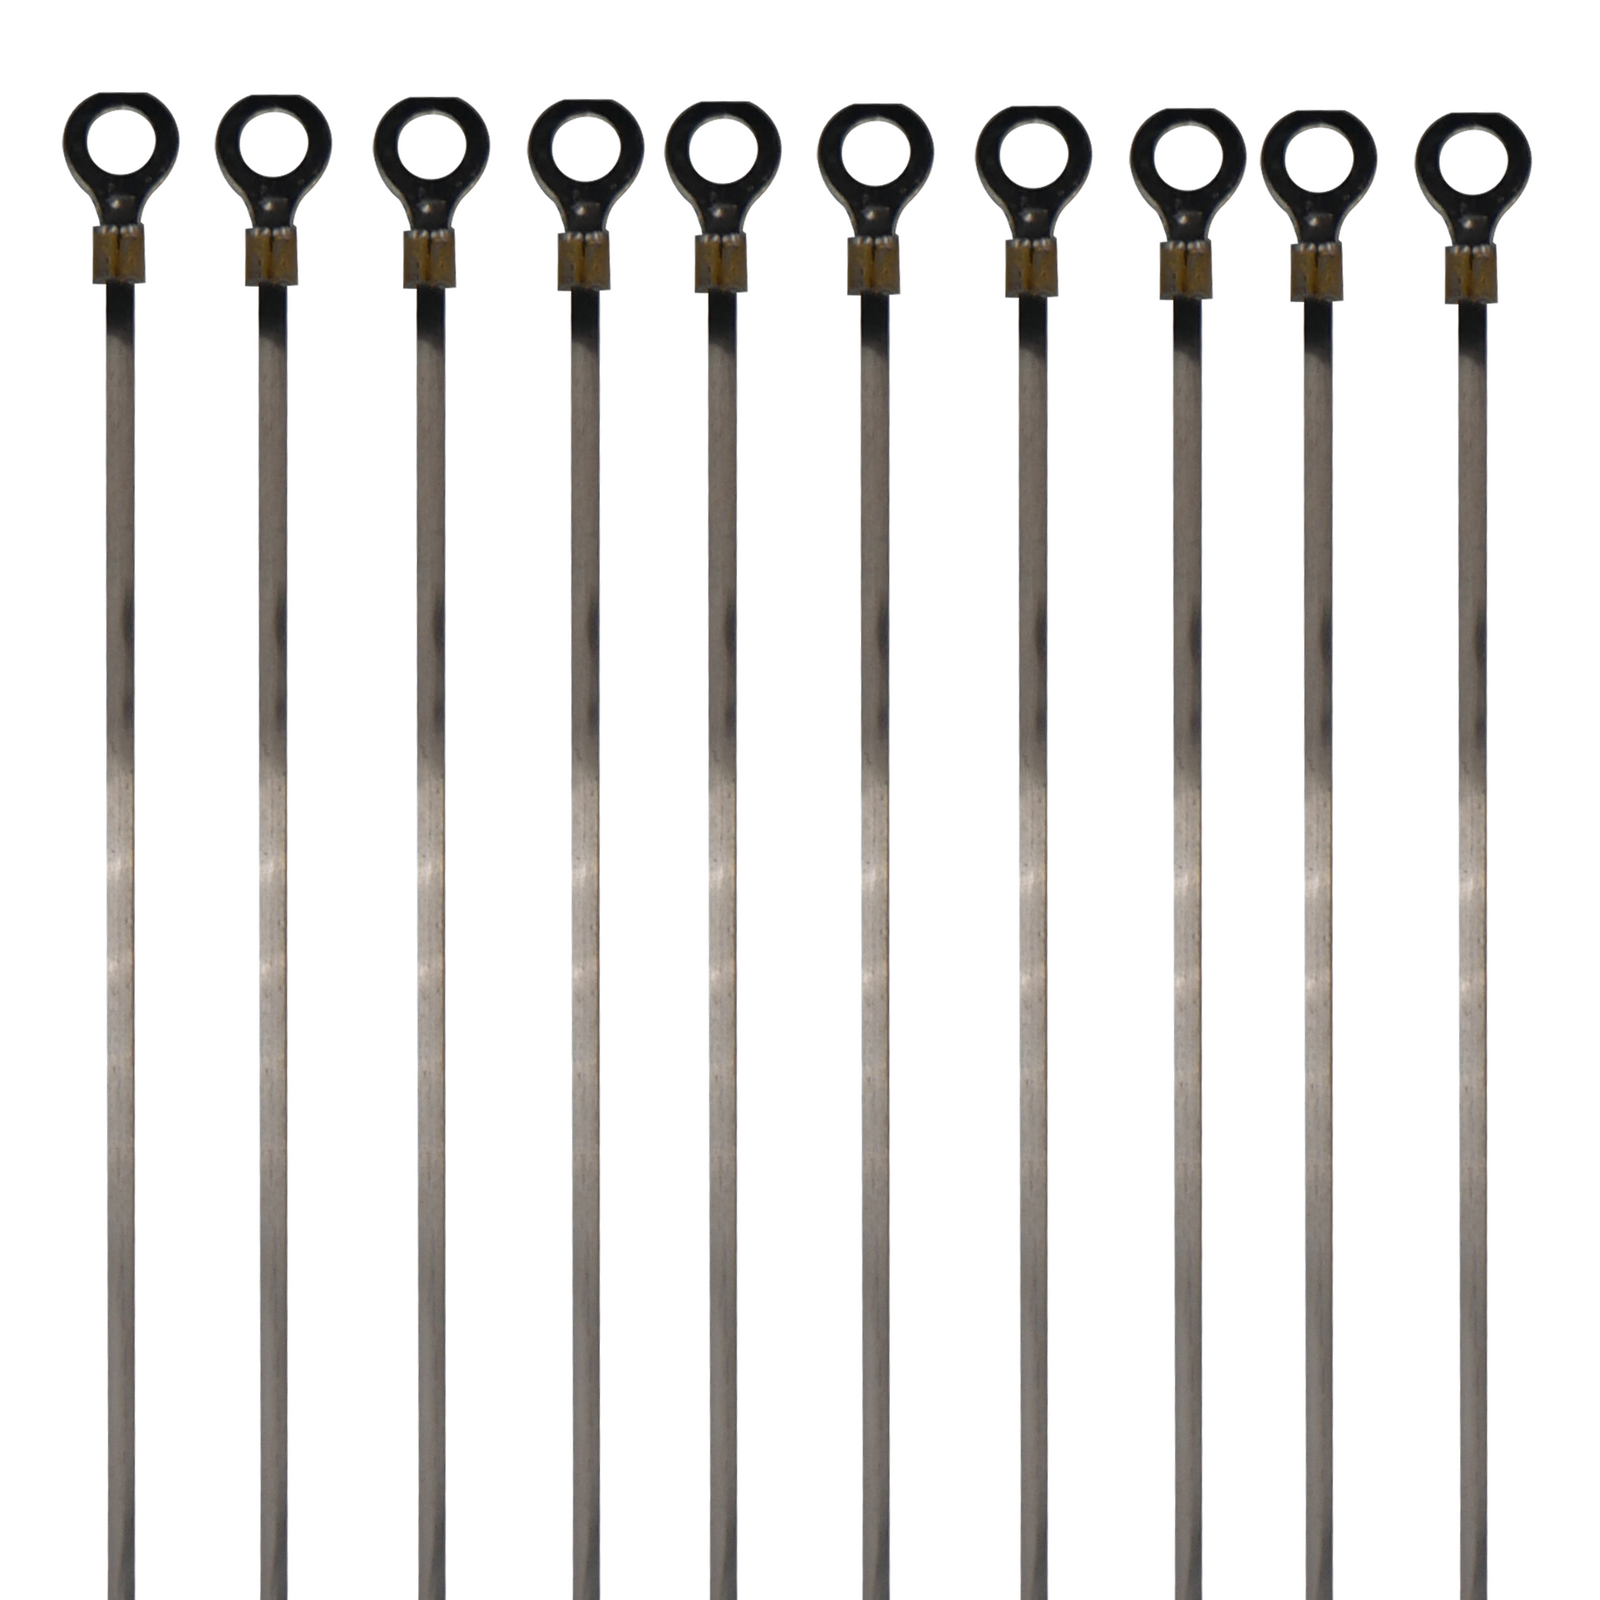 Pack of 10 heating elements parts for manual bag sealing machines